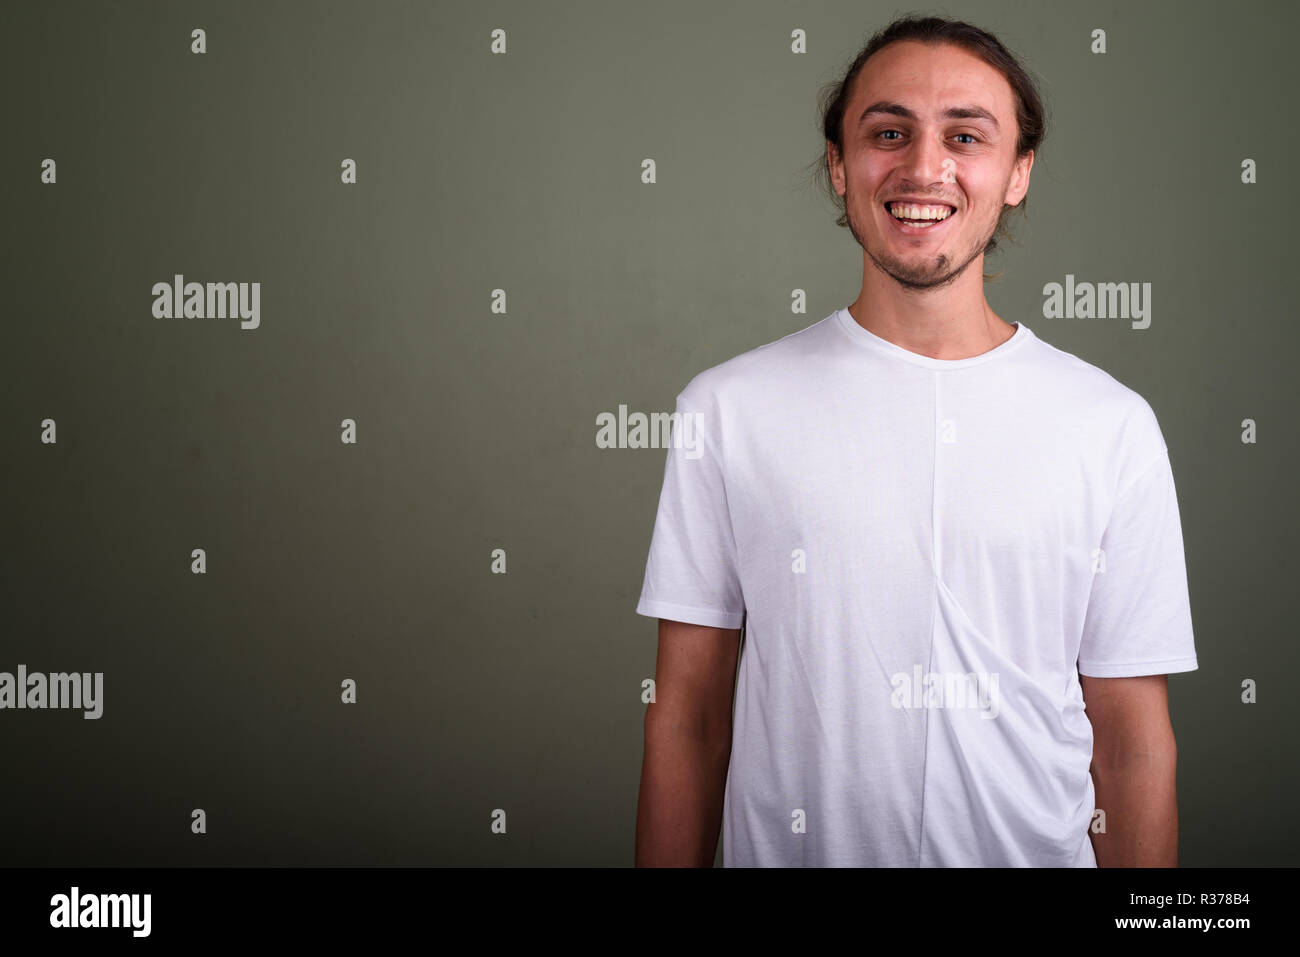 Young handsome man wearing white shirt against colored backgroun Stock Photo